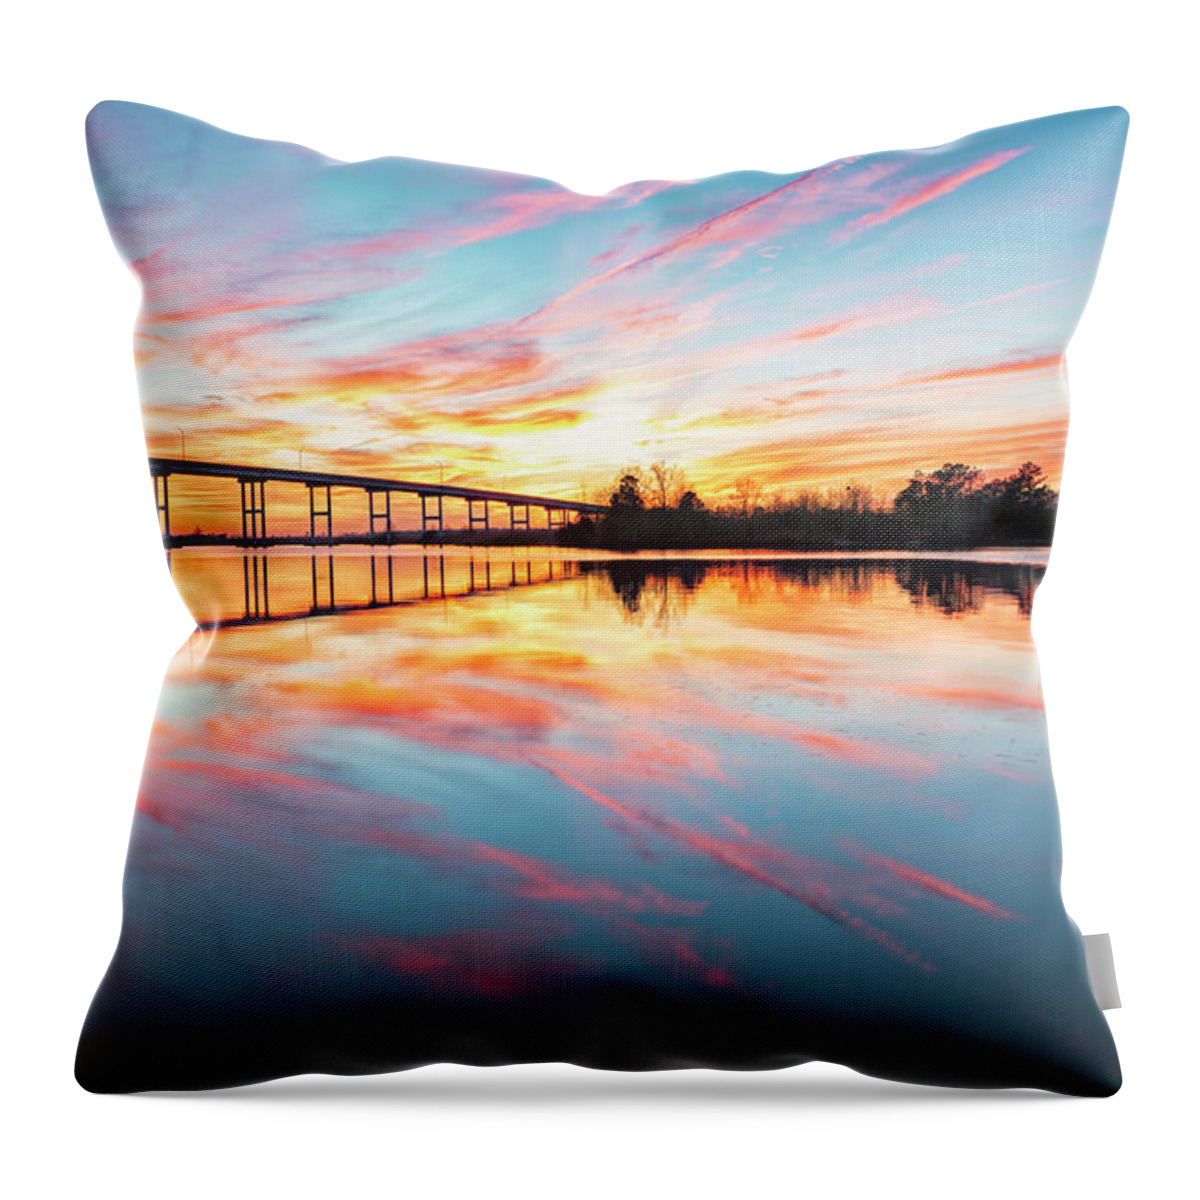 Sunset Glass Throw Pillow featuring the photograph Sunset Glass by Russell Pugh